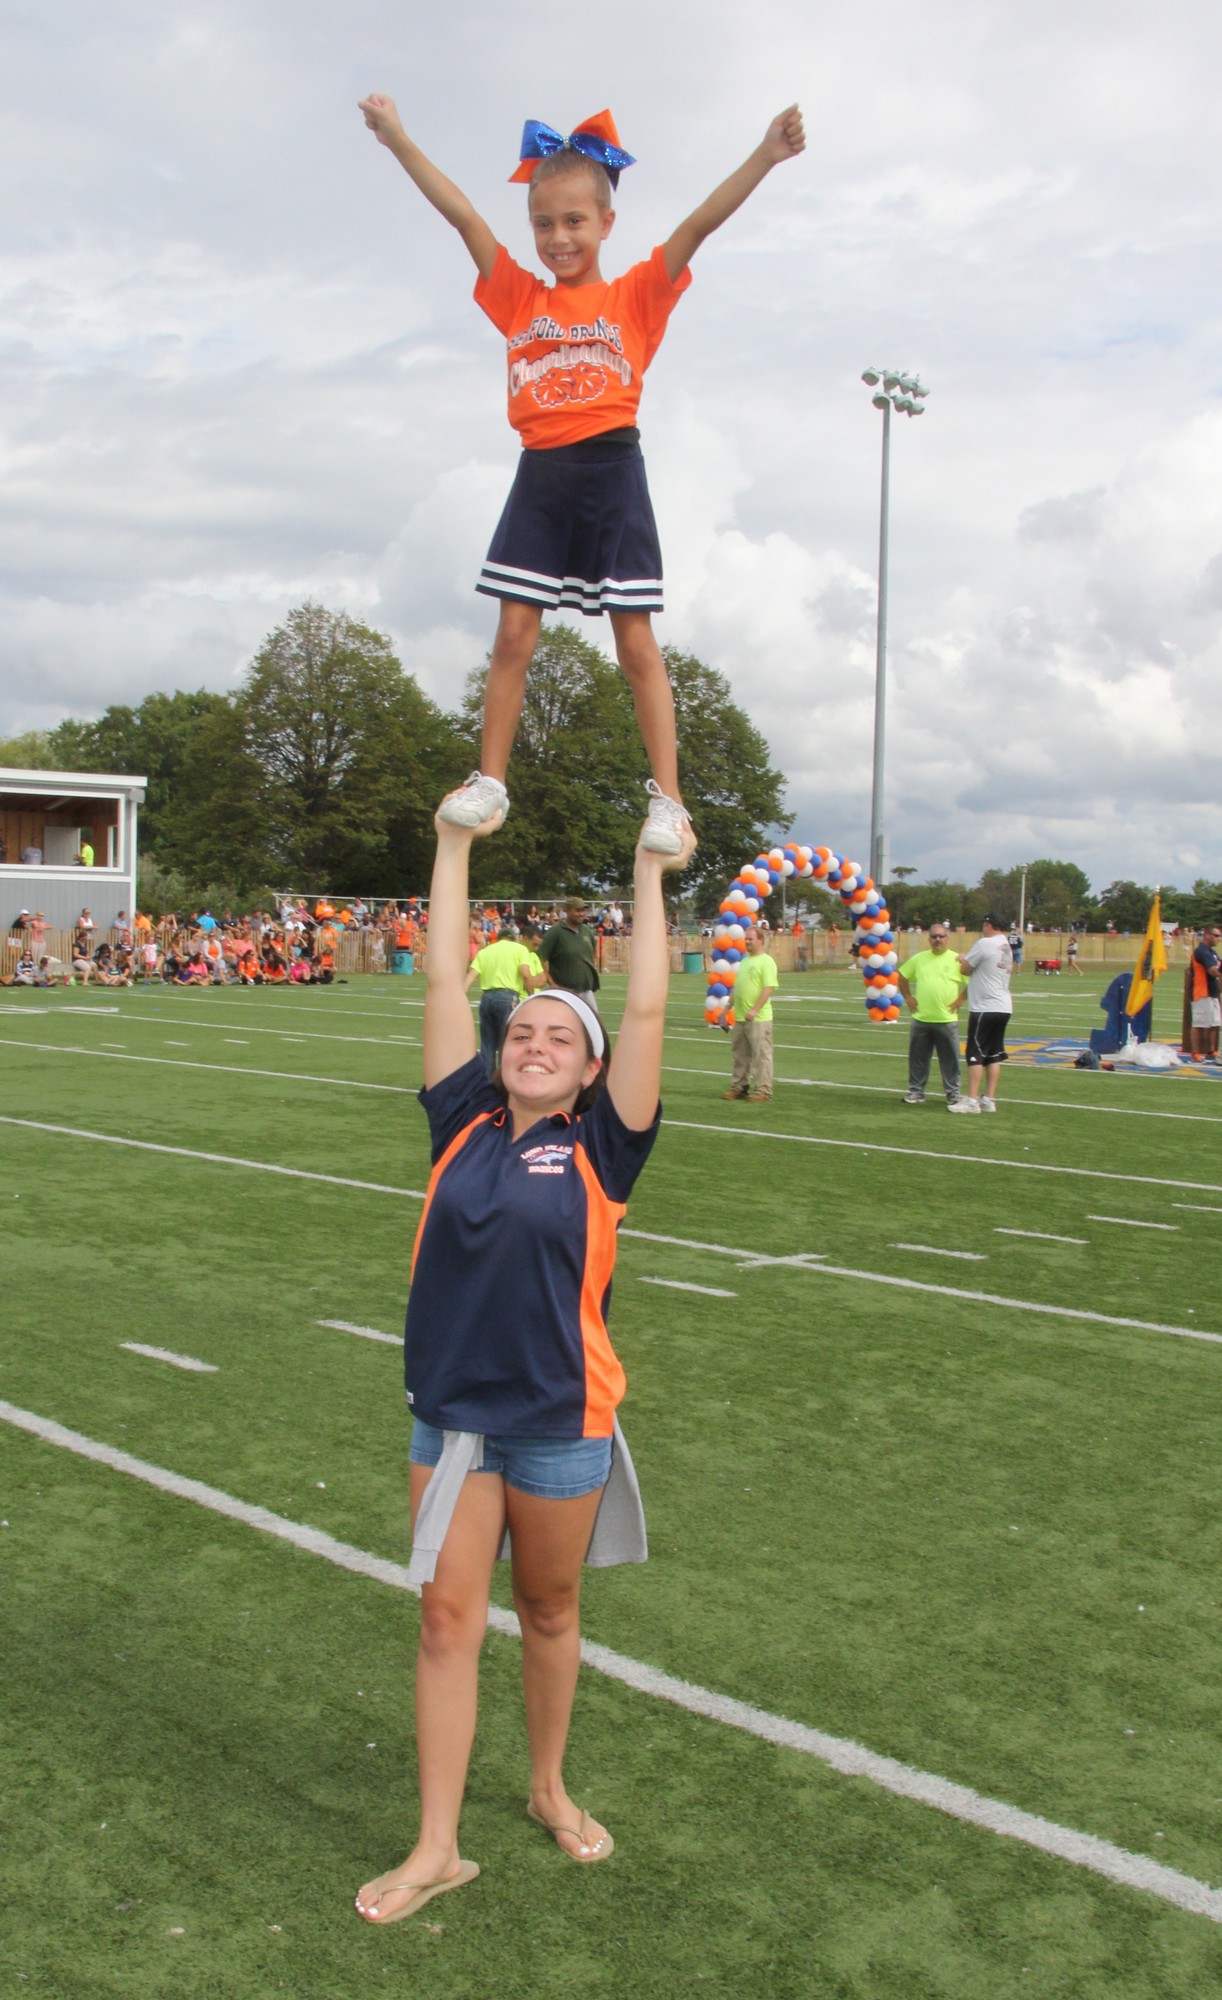 Madison Uher, 14, held Kayleigh Elias, 7, during a cheerleading routine to celebrate the beginning of the Long Island Broncos football season at Seaman’s Neck Park in Seaford.